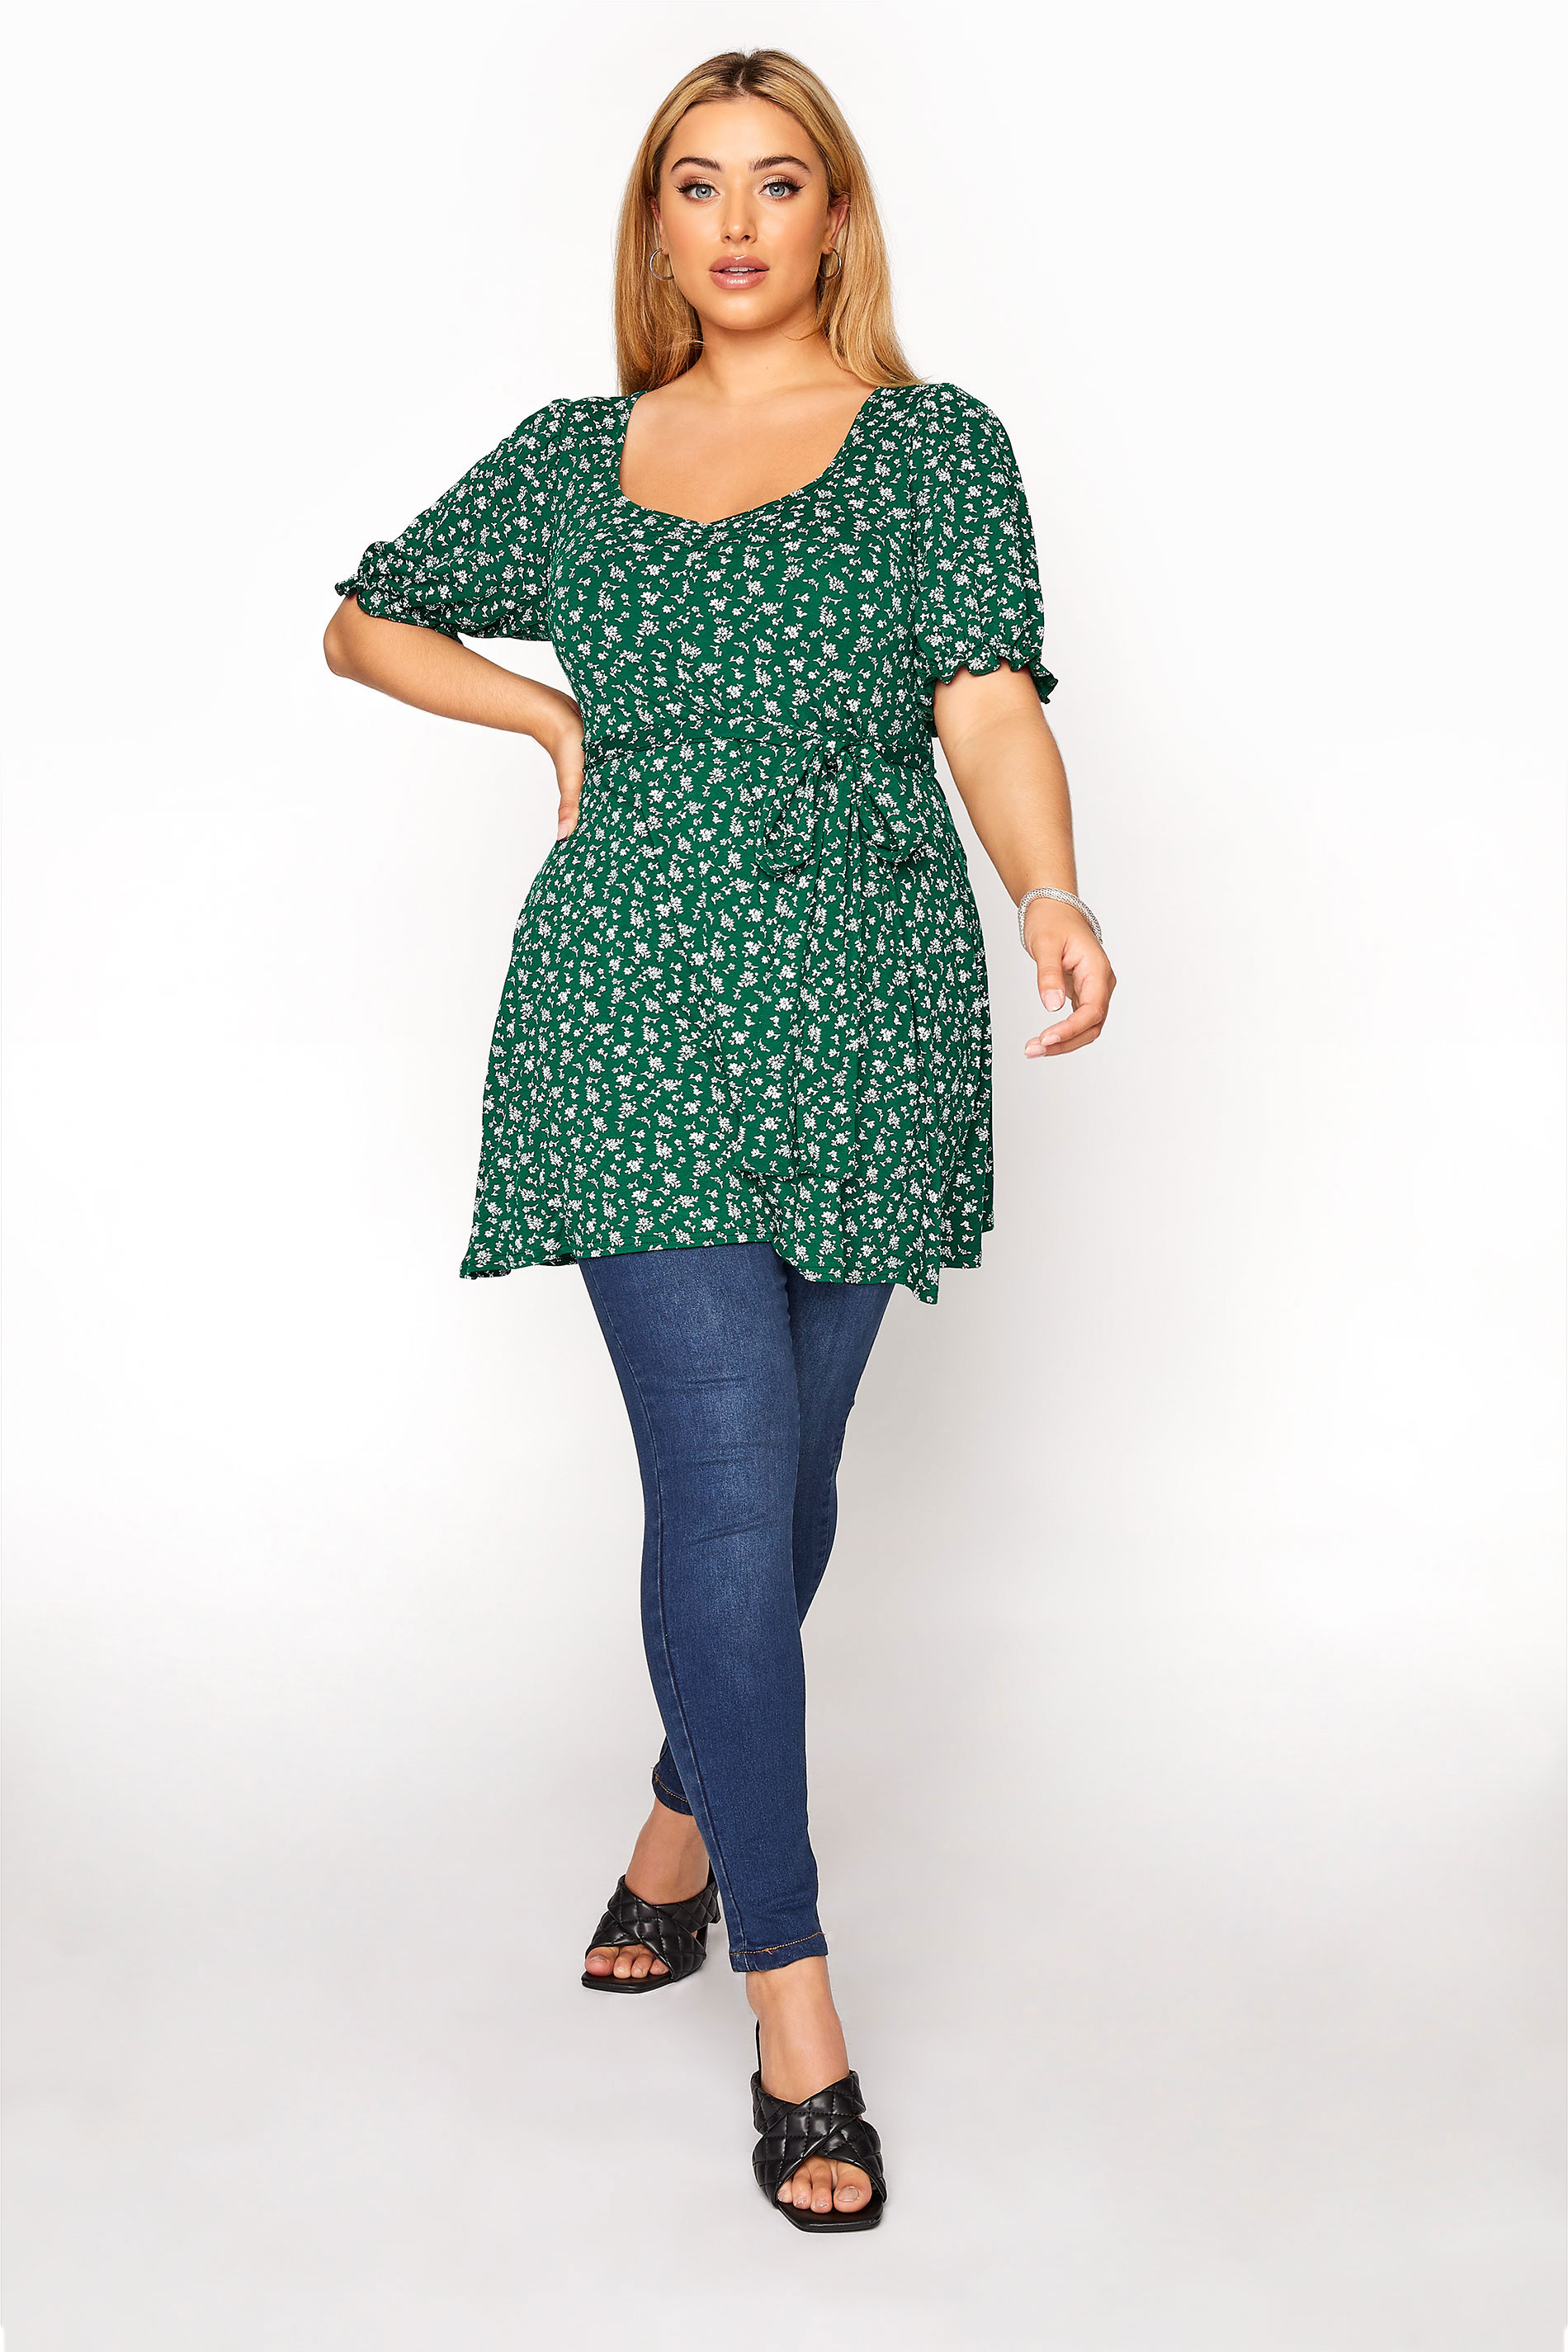 YOURS LONDON Green Ditsy Sweetheart Top